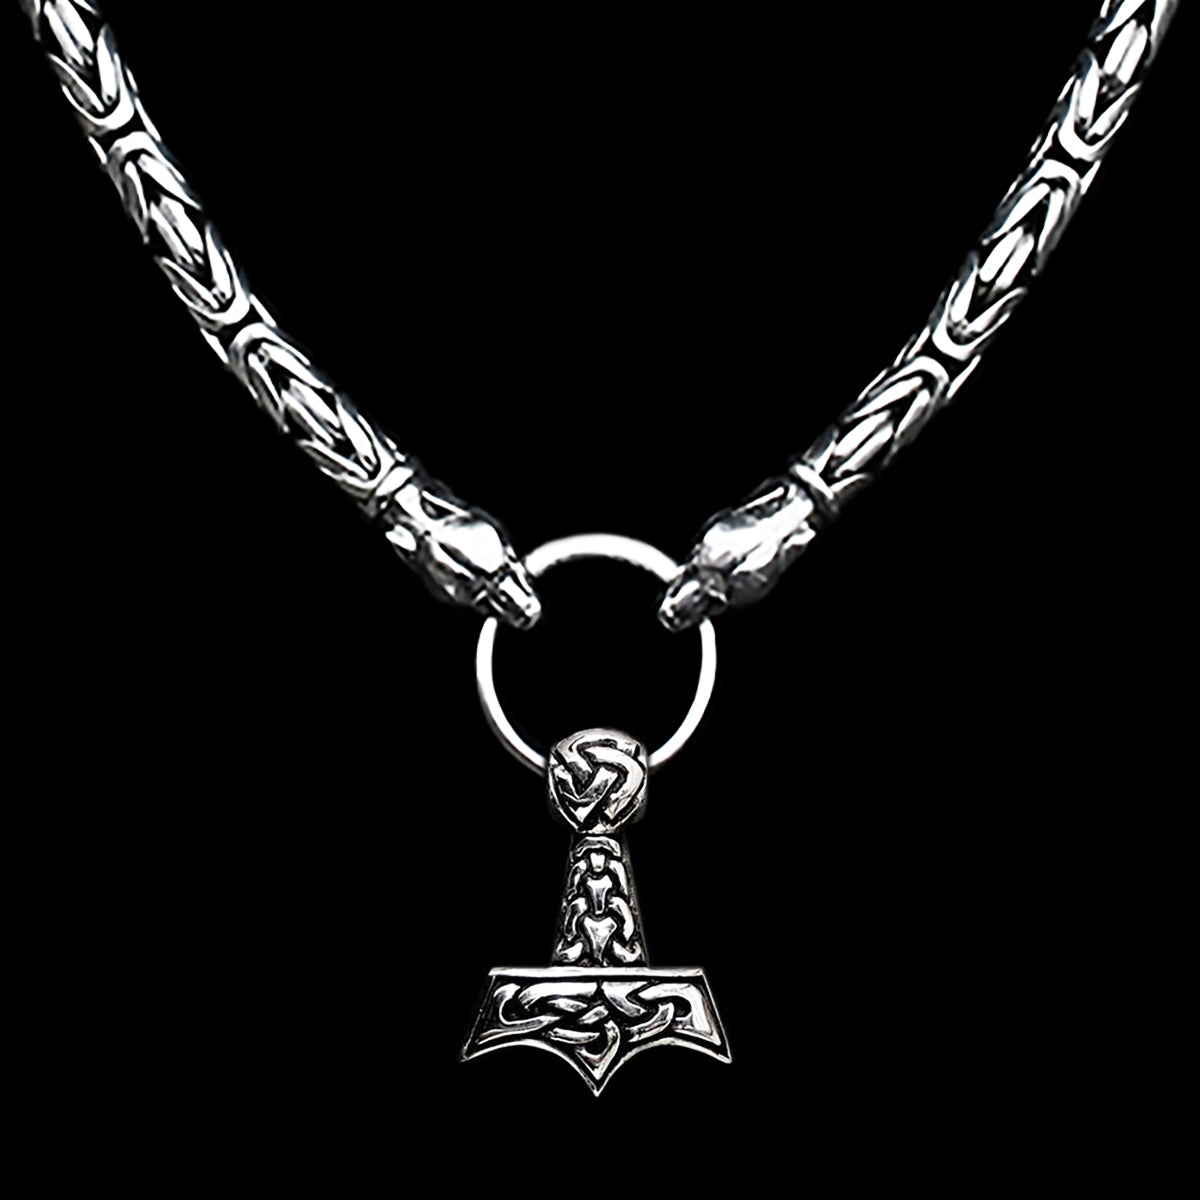 8mm Thick Silver Thor's Hammer Necklace with Ferocious Wolf Heads - Split Ring - AD2 Knotwork Thors Hammer